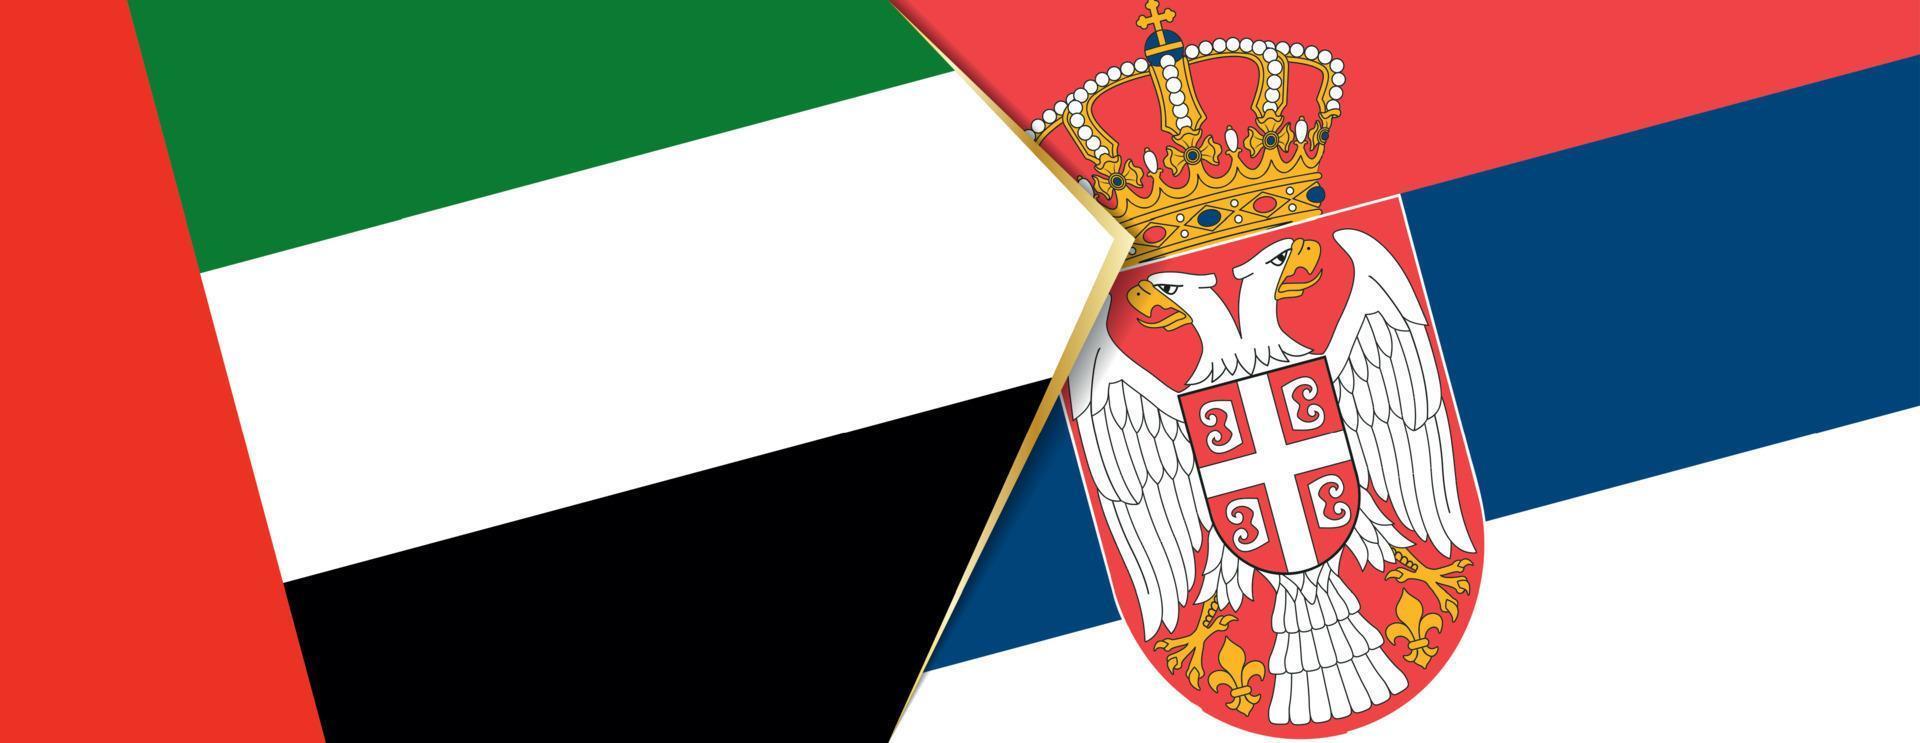 United Arab Emirates and Serbia flags, two vector flags.